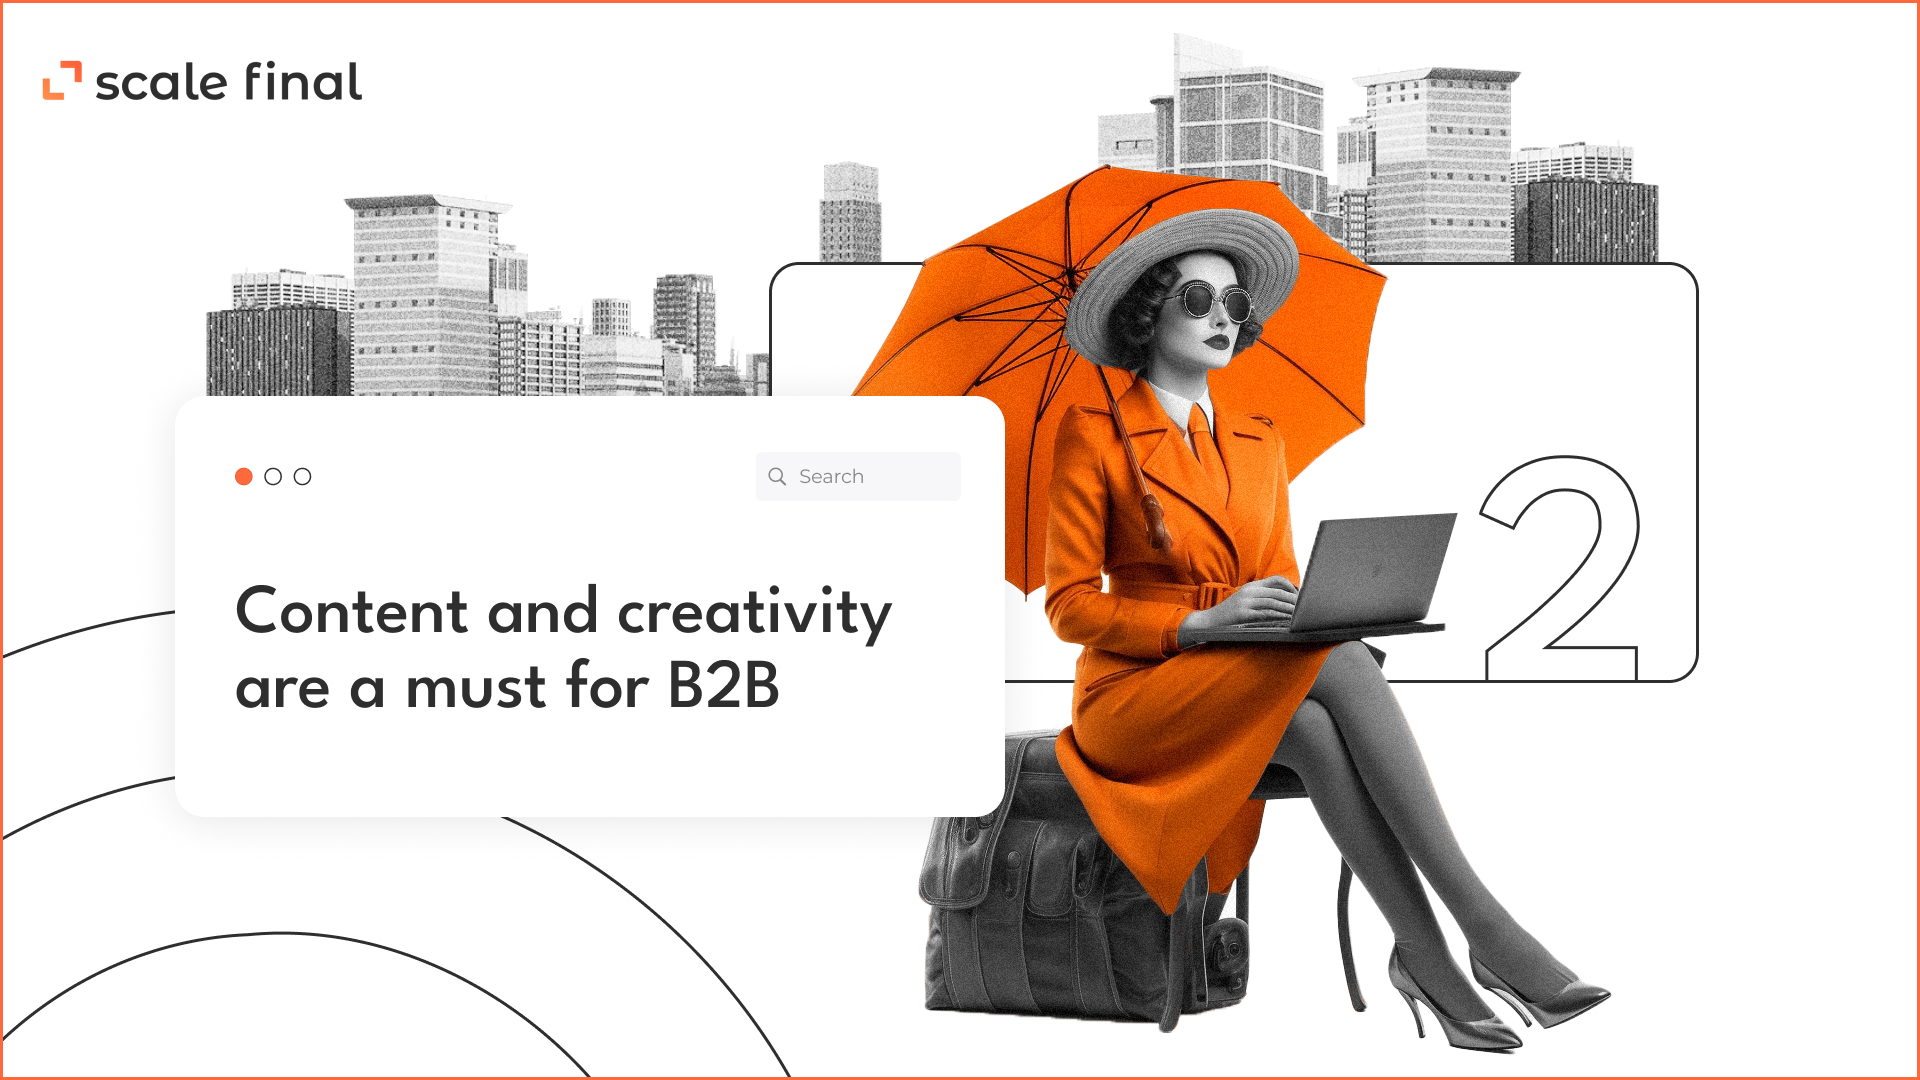  Content and creativity are a must for B2B